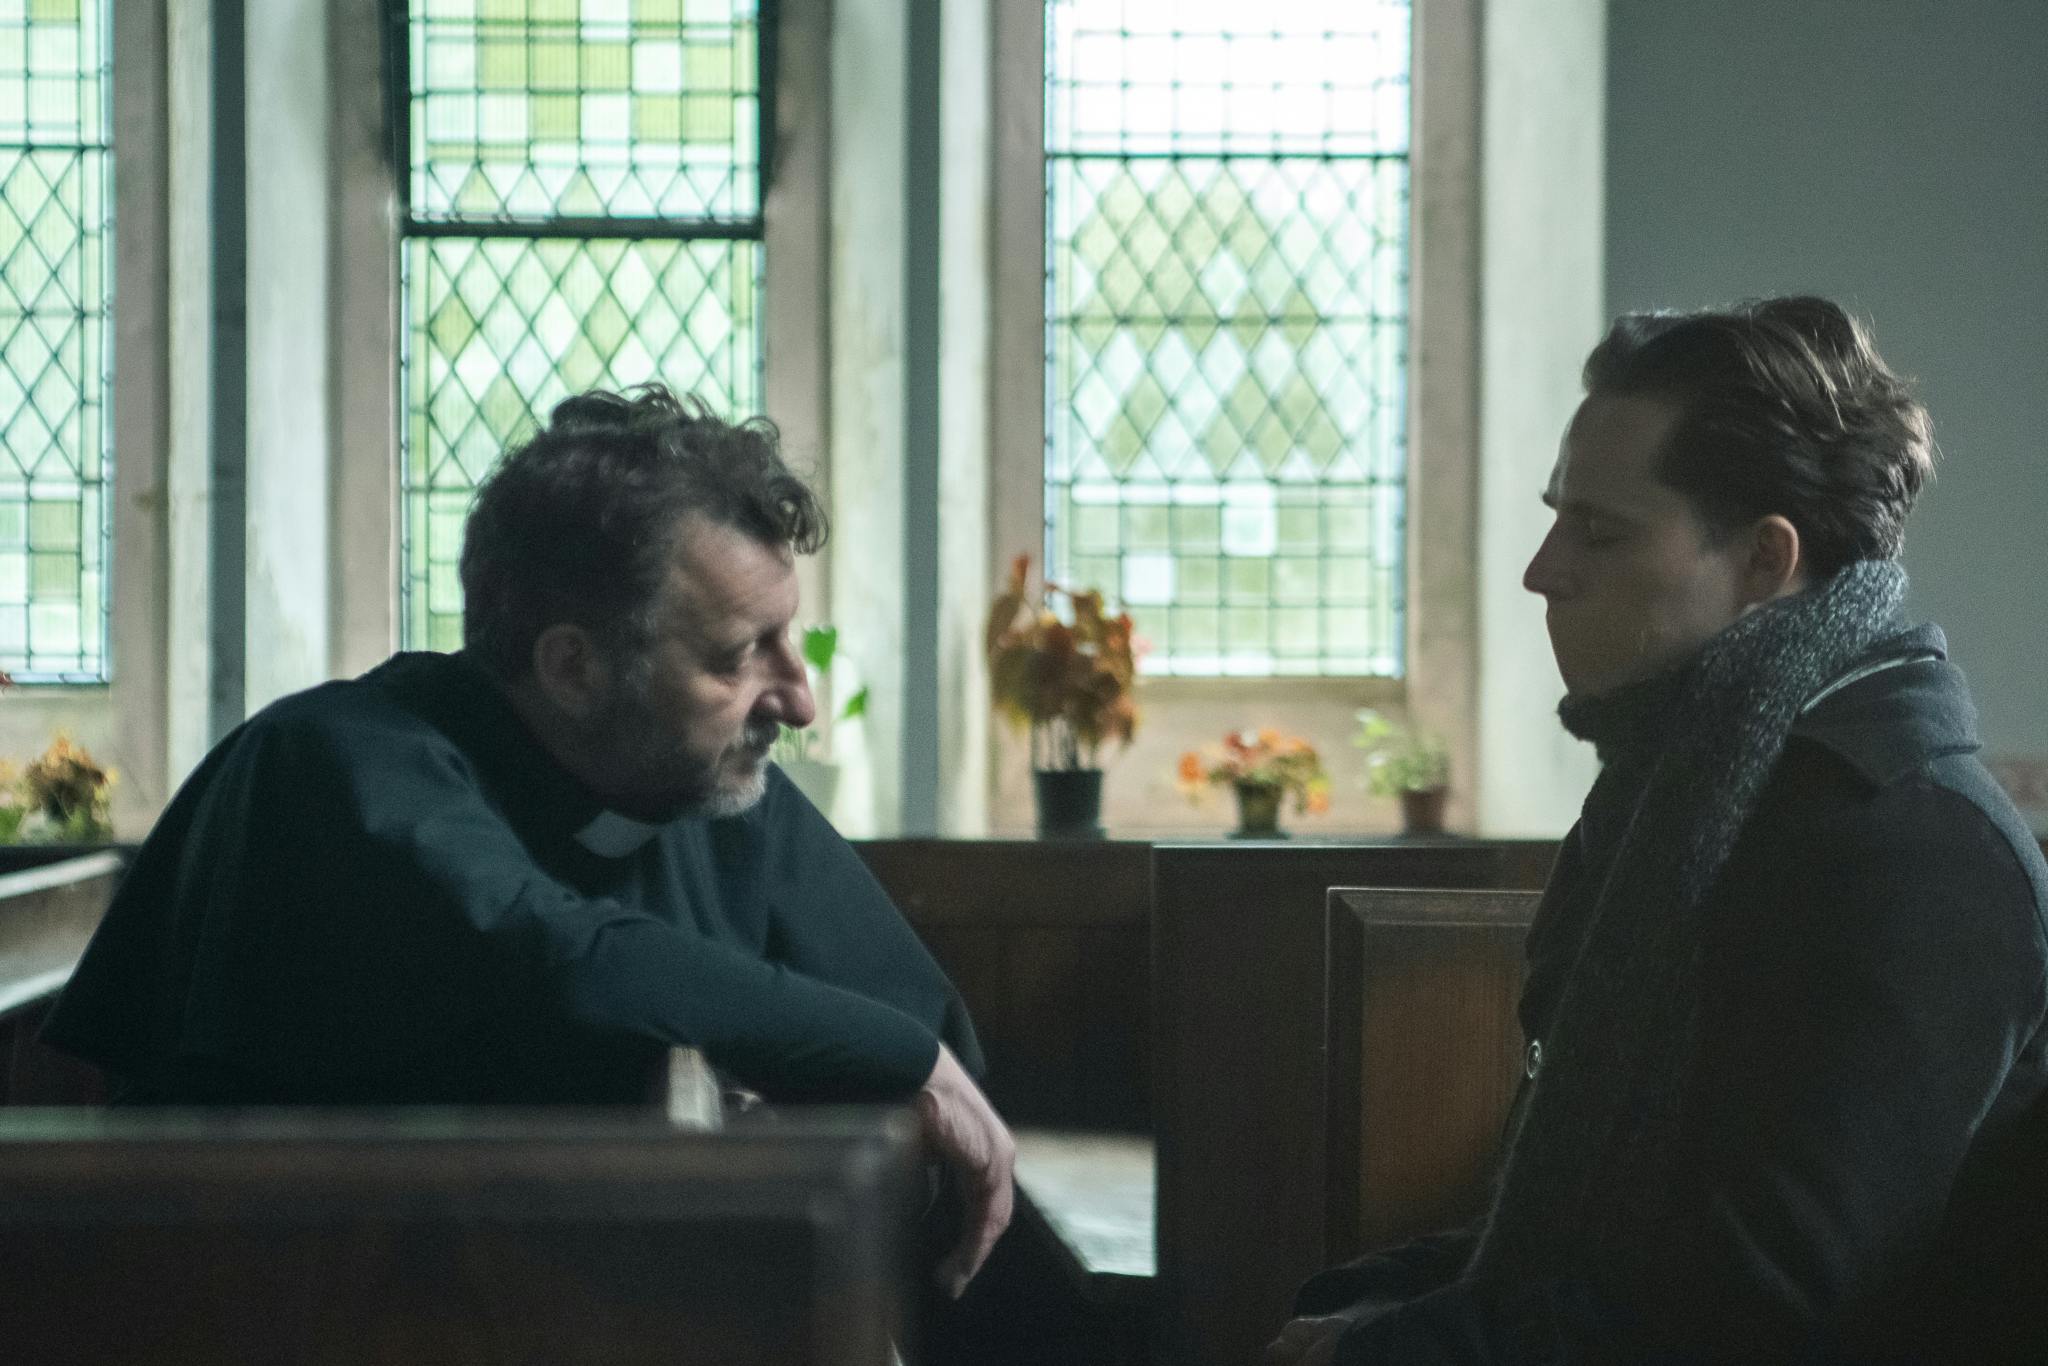 Picture features two characters in a church, on the left is a older man, a priest, speaking to a younger man on the right who's wearing a scarf and a heavy coat